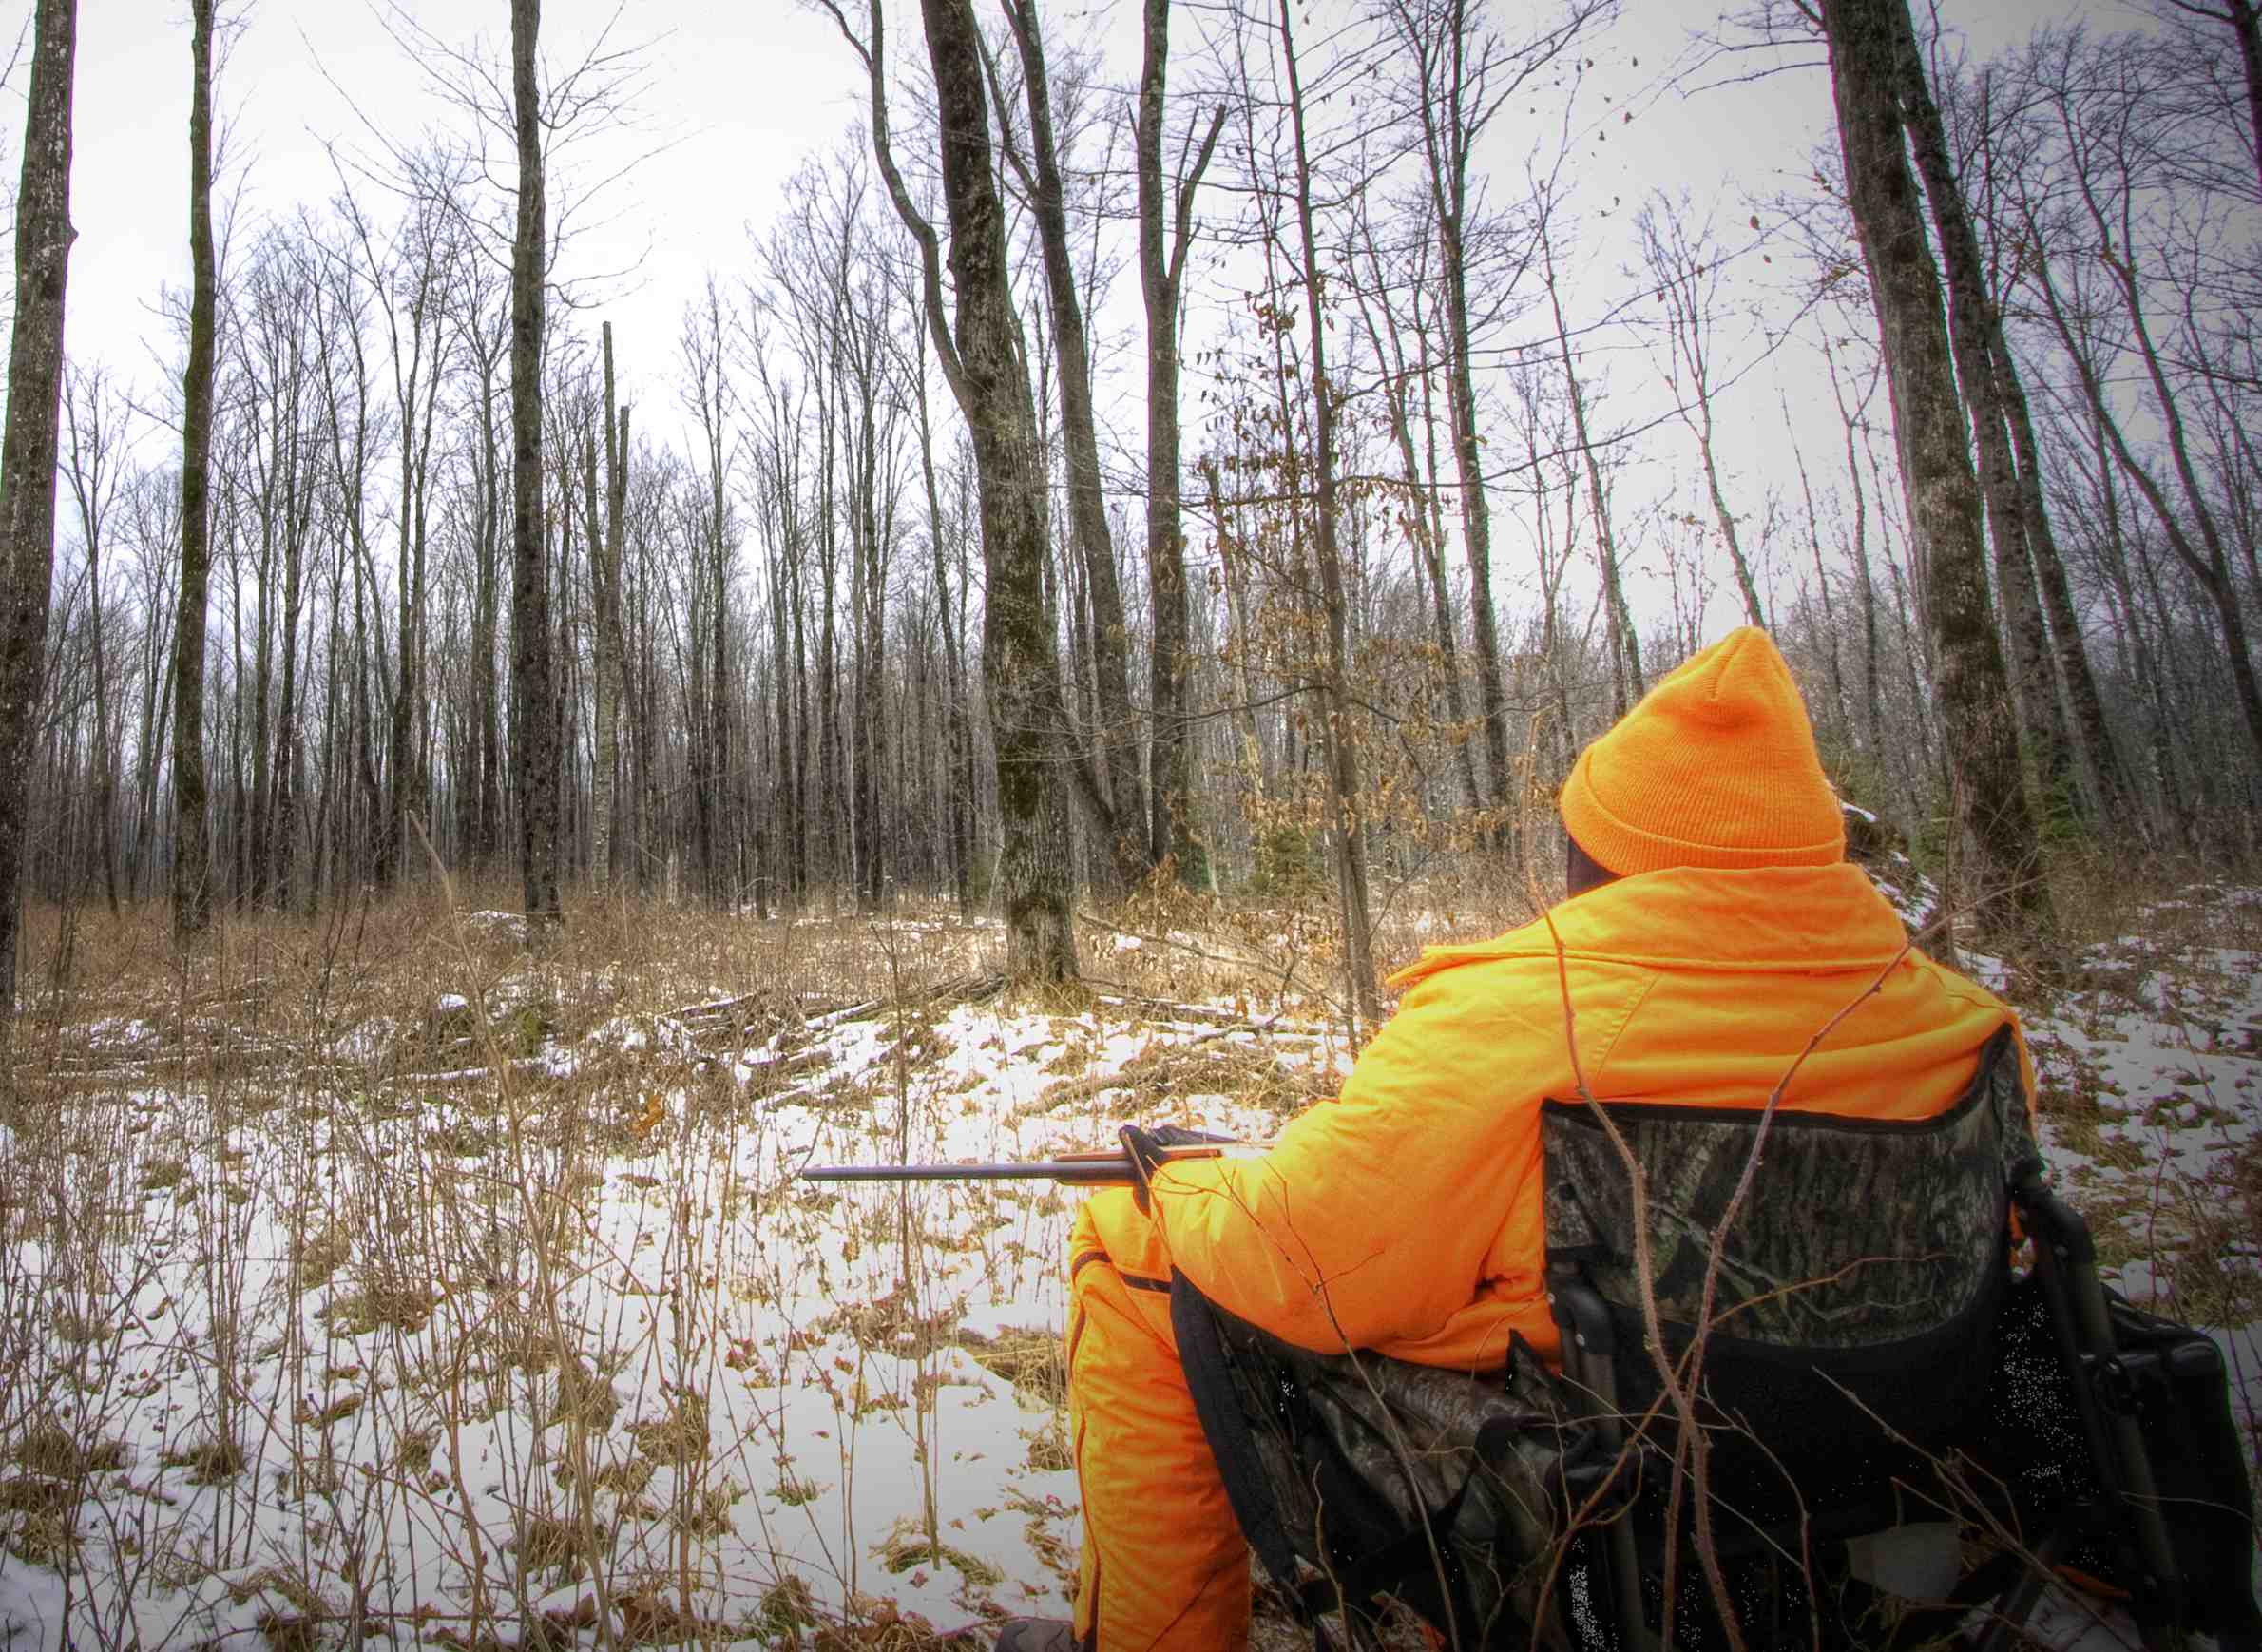 Cold and snow create ideal conditions for Wisconsin’s 9-day gun deer season that opens Saturday